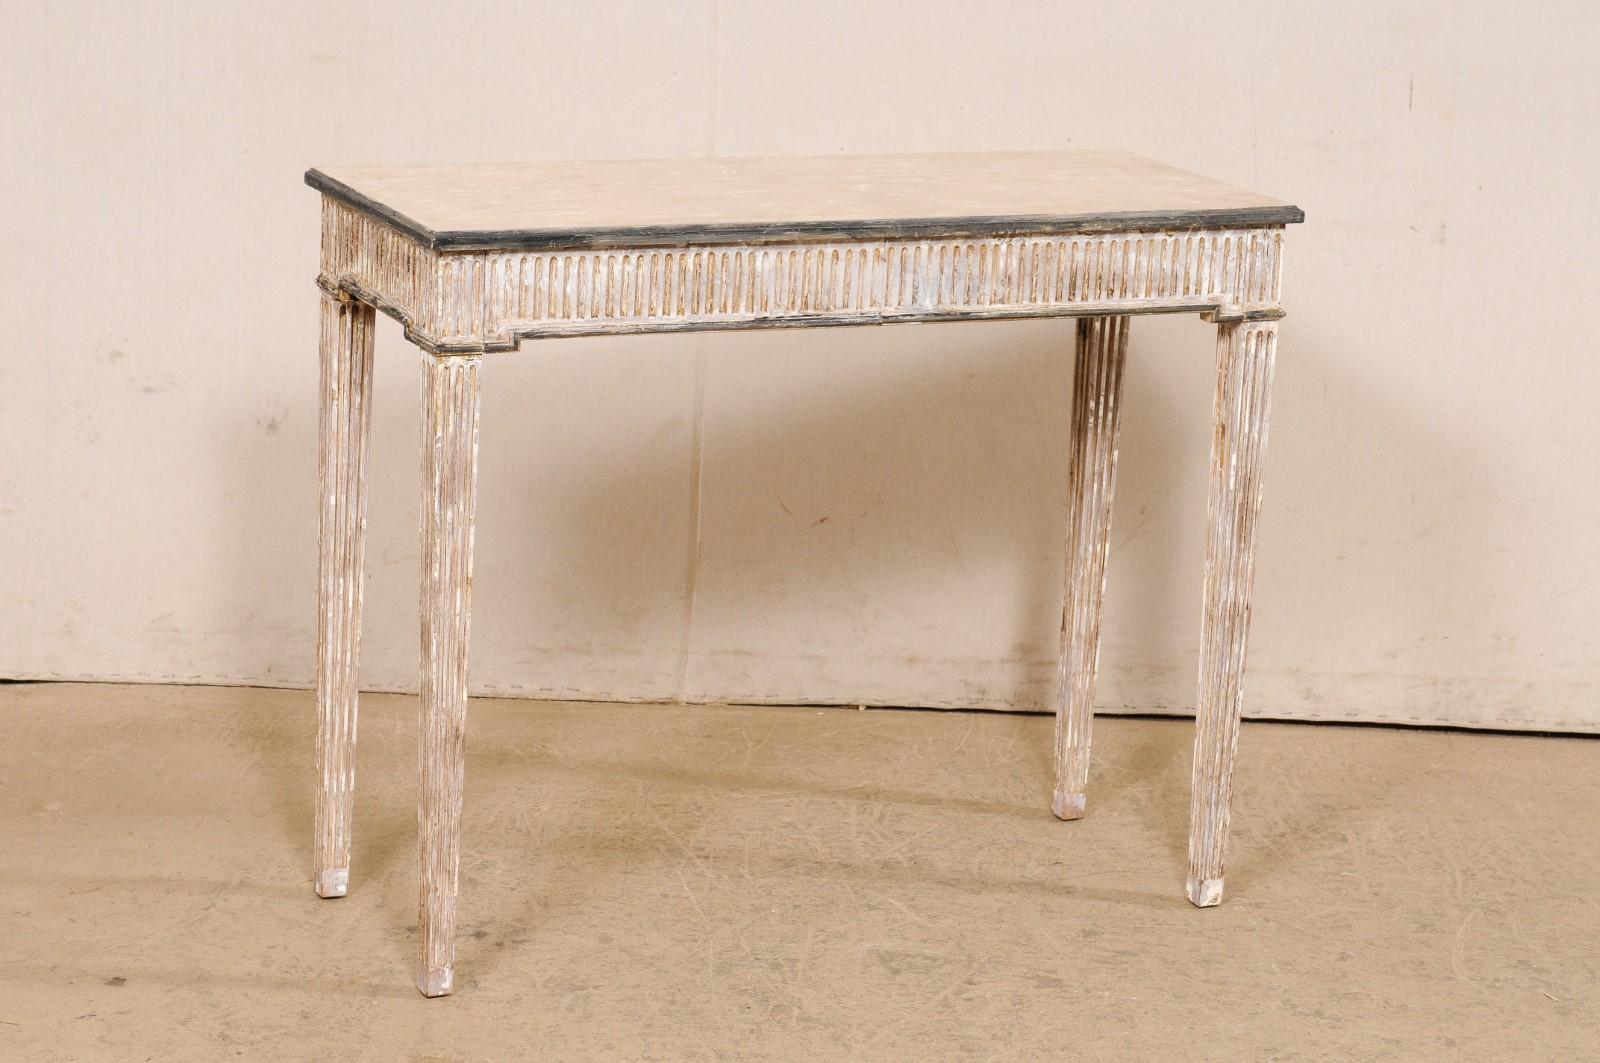 An Italian flute-carved and painted wood console table from the mid 20th century. This vintage table from Italy has a slightly overhanging rectangular-shaped top, resting upon an apron which houses two half-sized drawers that are hidden along the